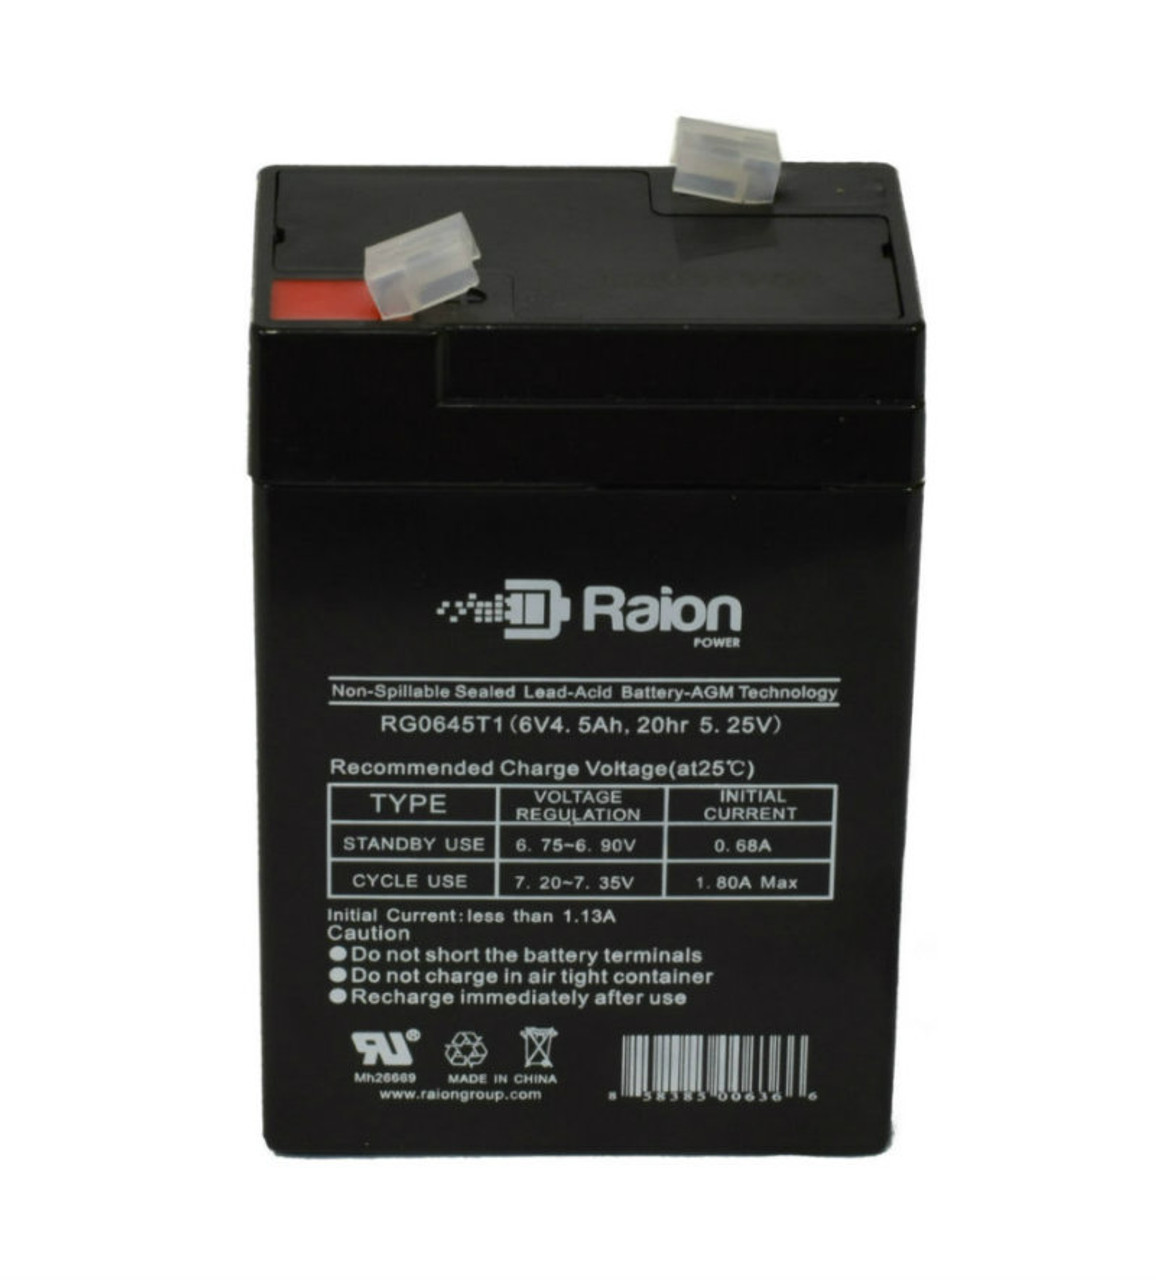 Raion Power RG0645T1 Replacement Battery Cartridge for FengSheng FS6-5